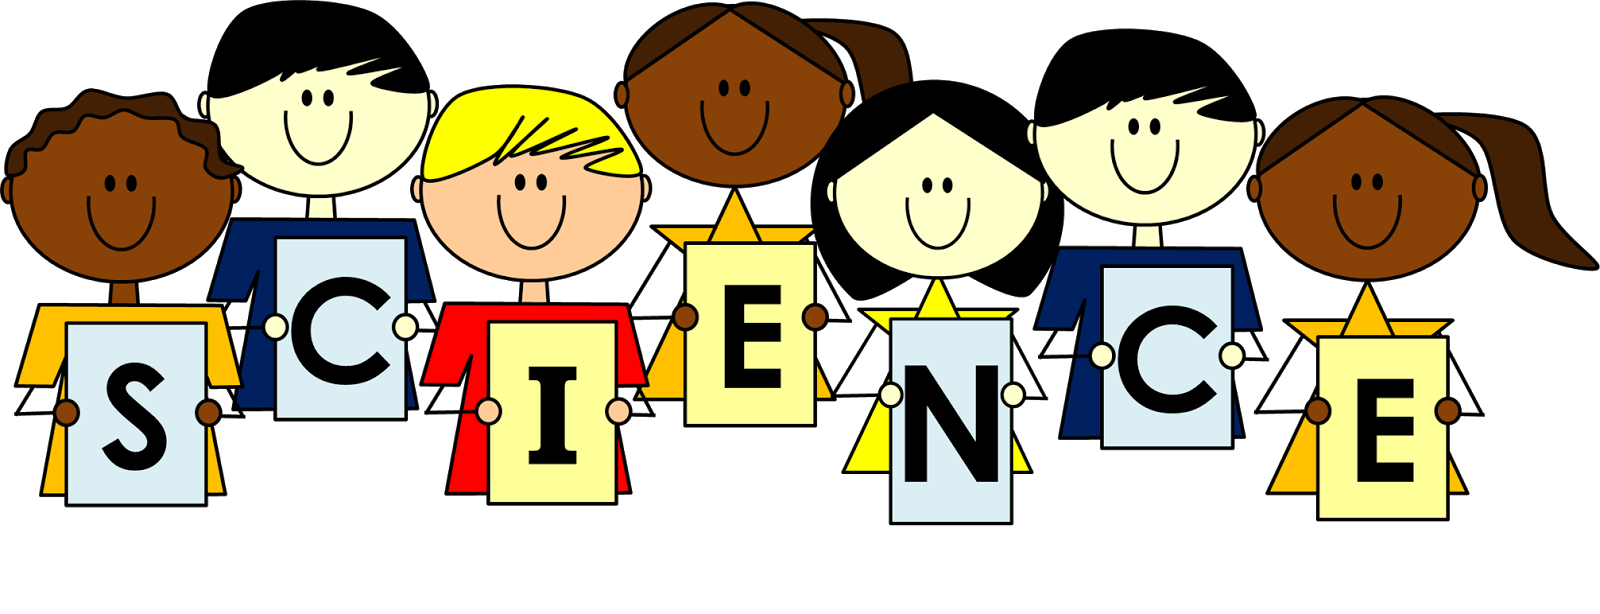 Science For Kids Image Clipart Clipart